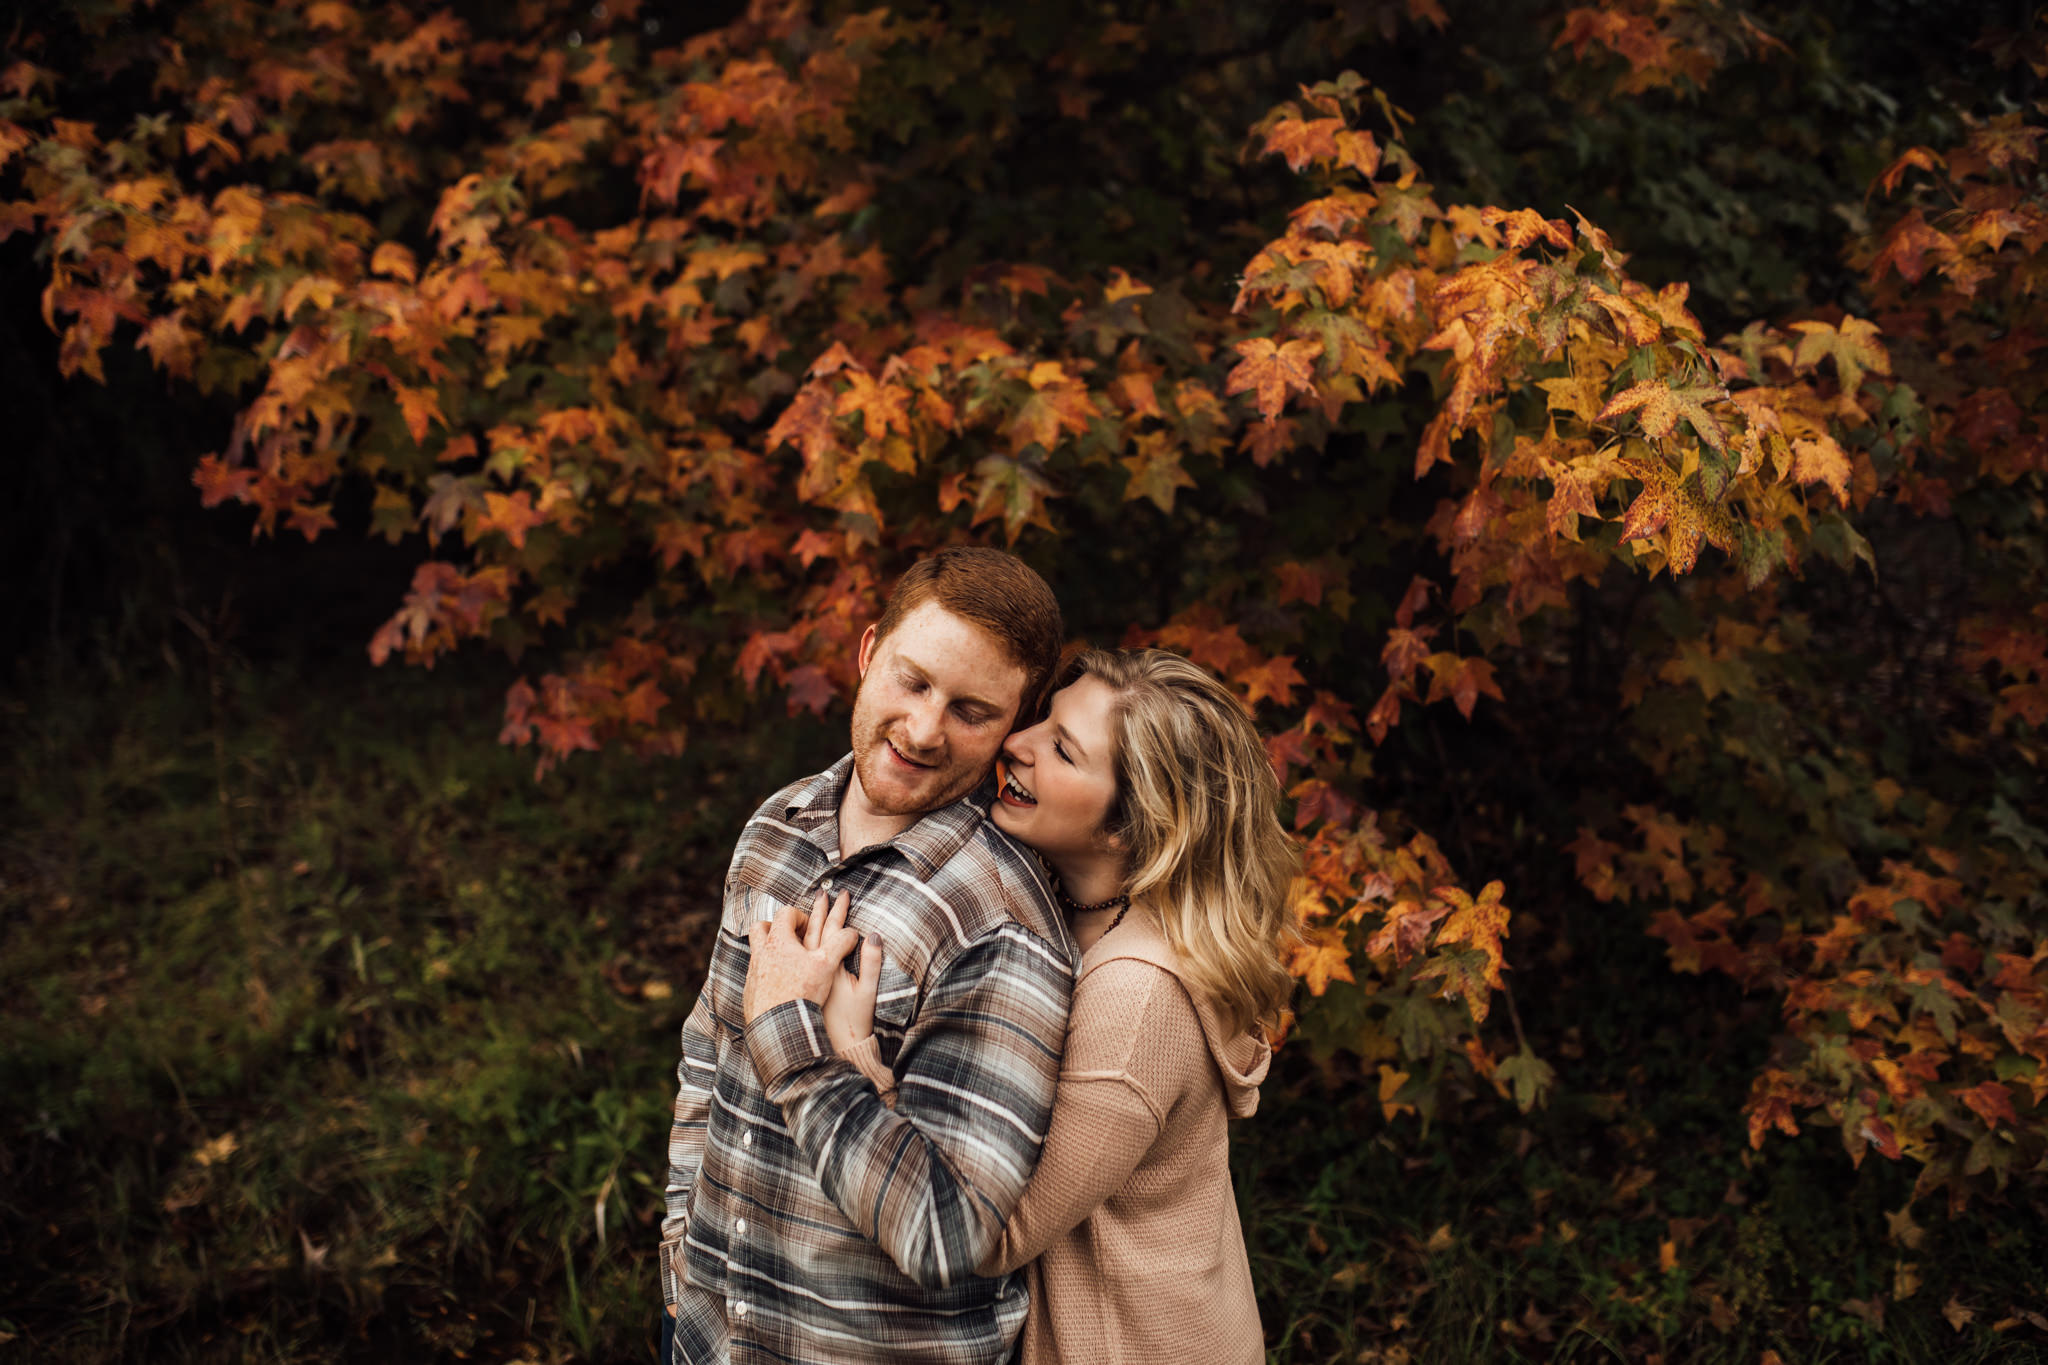 cassie-cook-photography-memphis-wedding-photographer-fall-engagement-picture-leaves-colorful-madison-carter-8.jpg